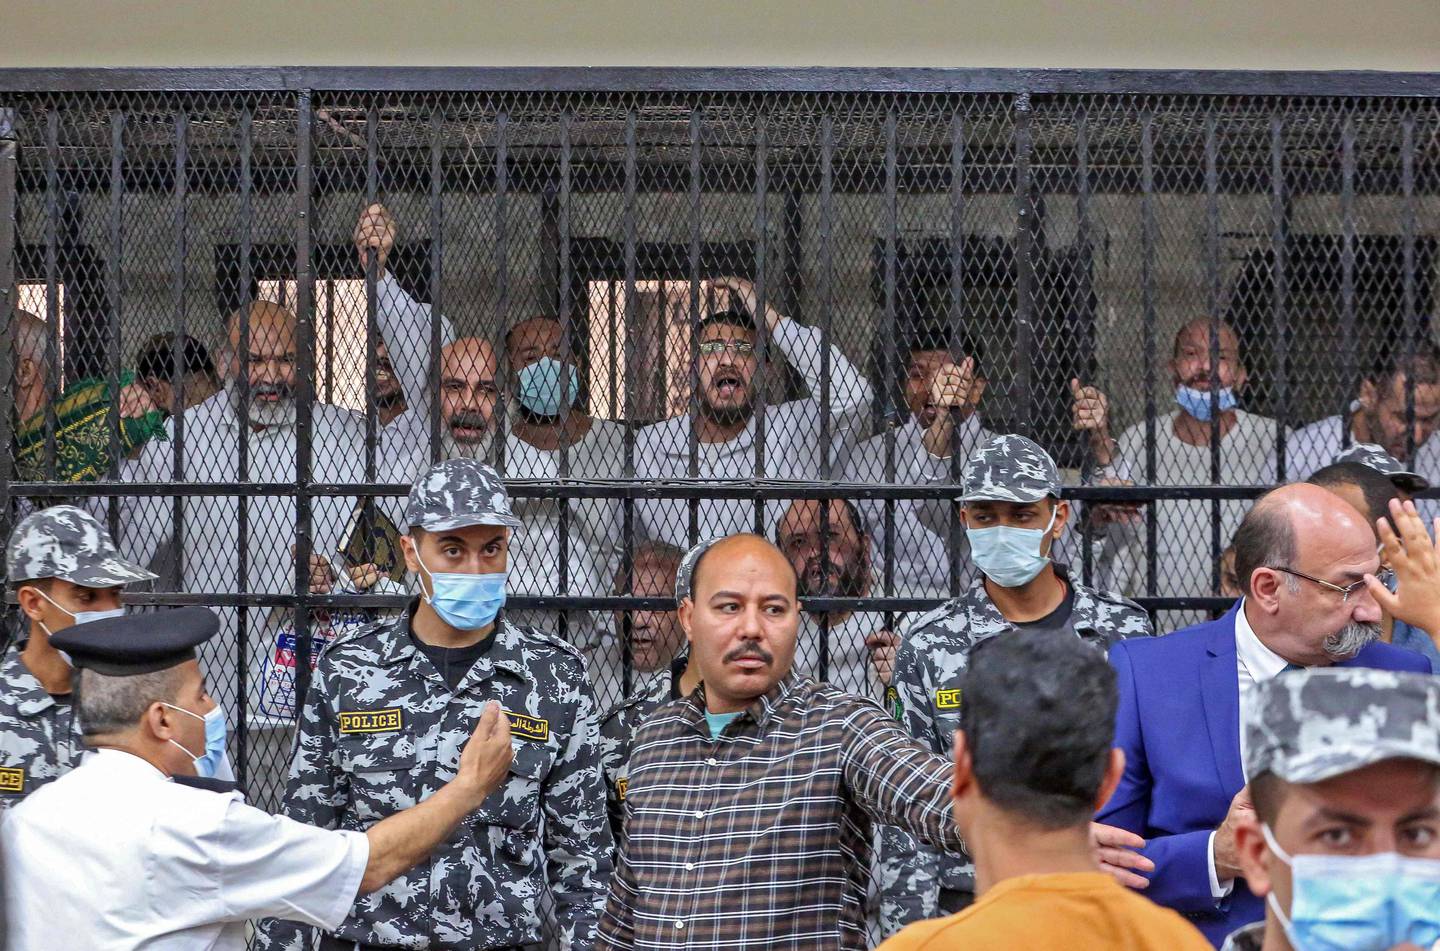 Men charged with illegal excavation and trafficking of antiquities react in the accused dock during the verdict announcement session of their trial in Egypt's capital Cairo on April 21, 2022.  - The court handed Egyptian businessman Hassan Ratib a five-year jail sentence, and former MP Alaa Hassanein (standing-L) 10 years, local media reported.  (Photo by Khaled KAMEL  /  AFP)